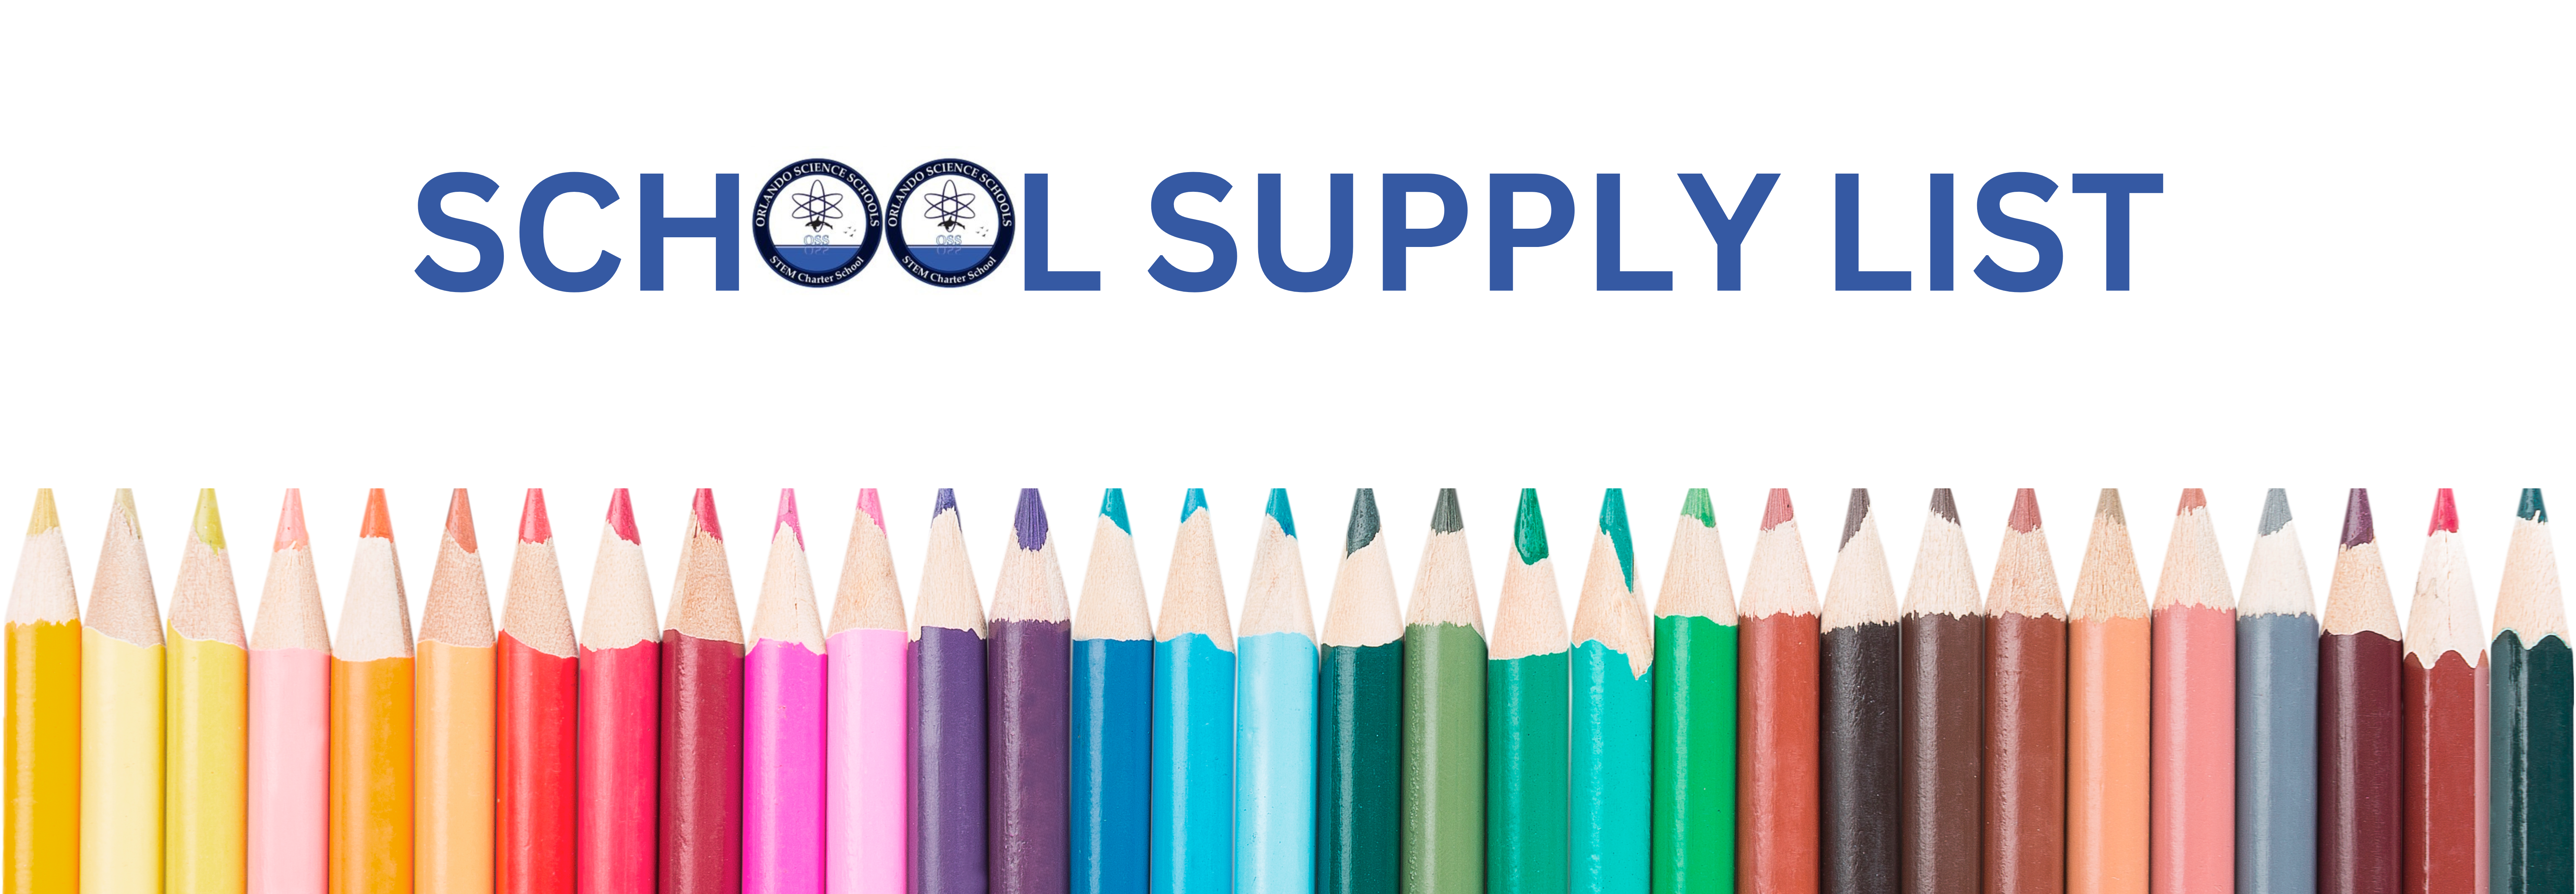 OSES School Supply Banner